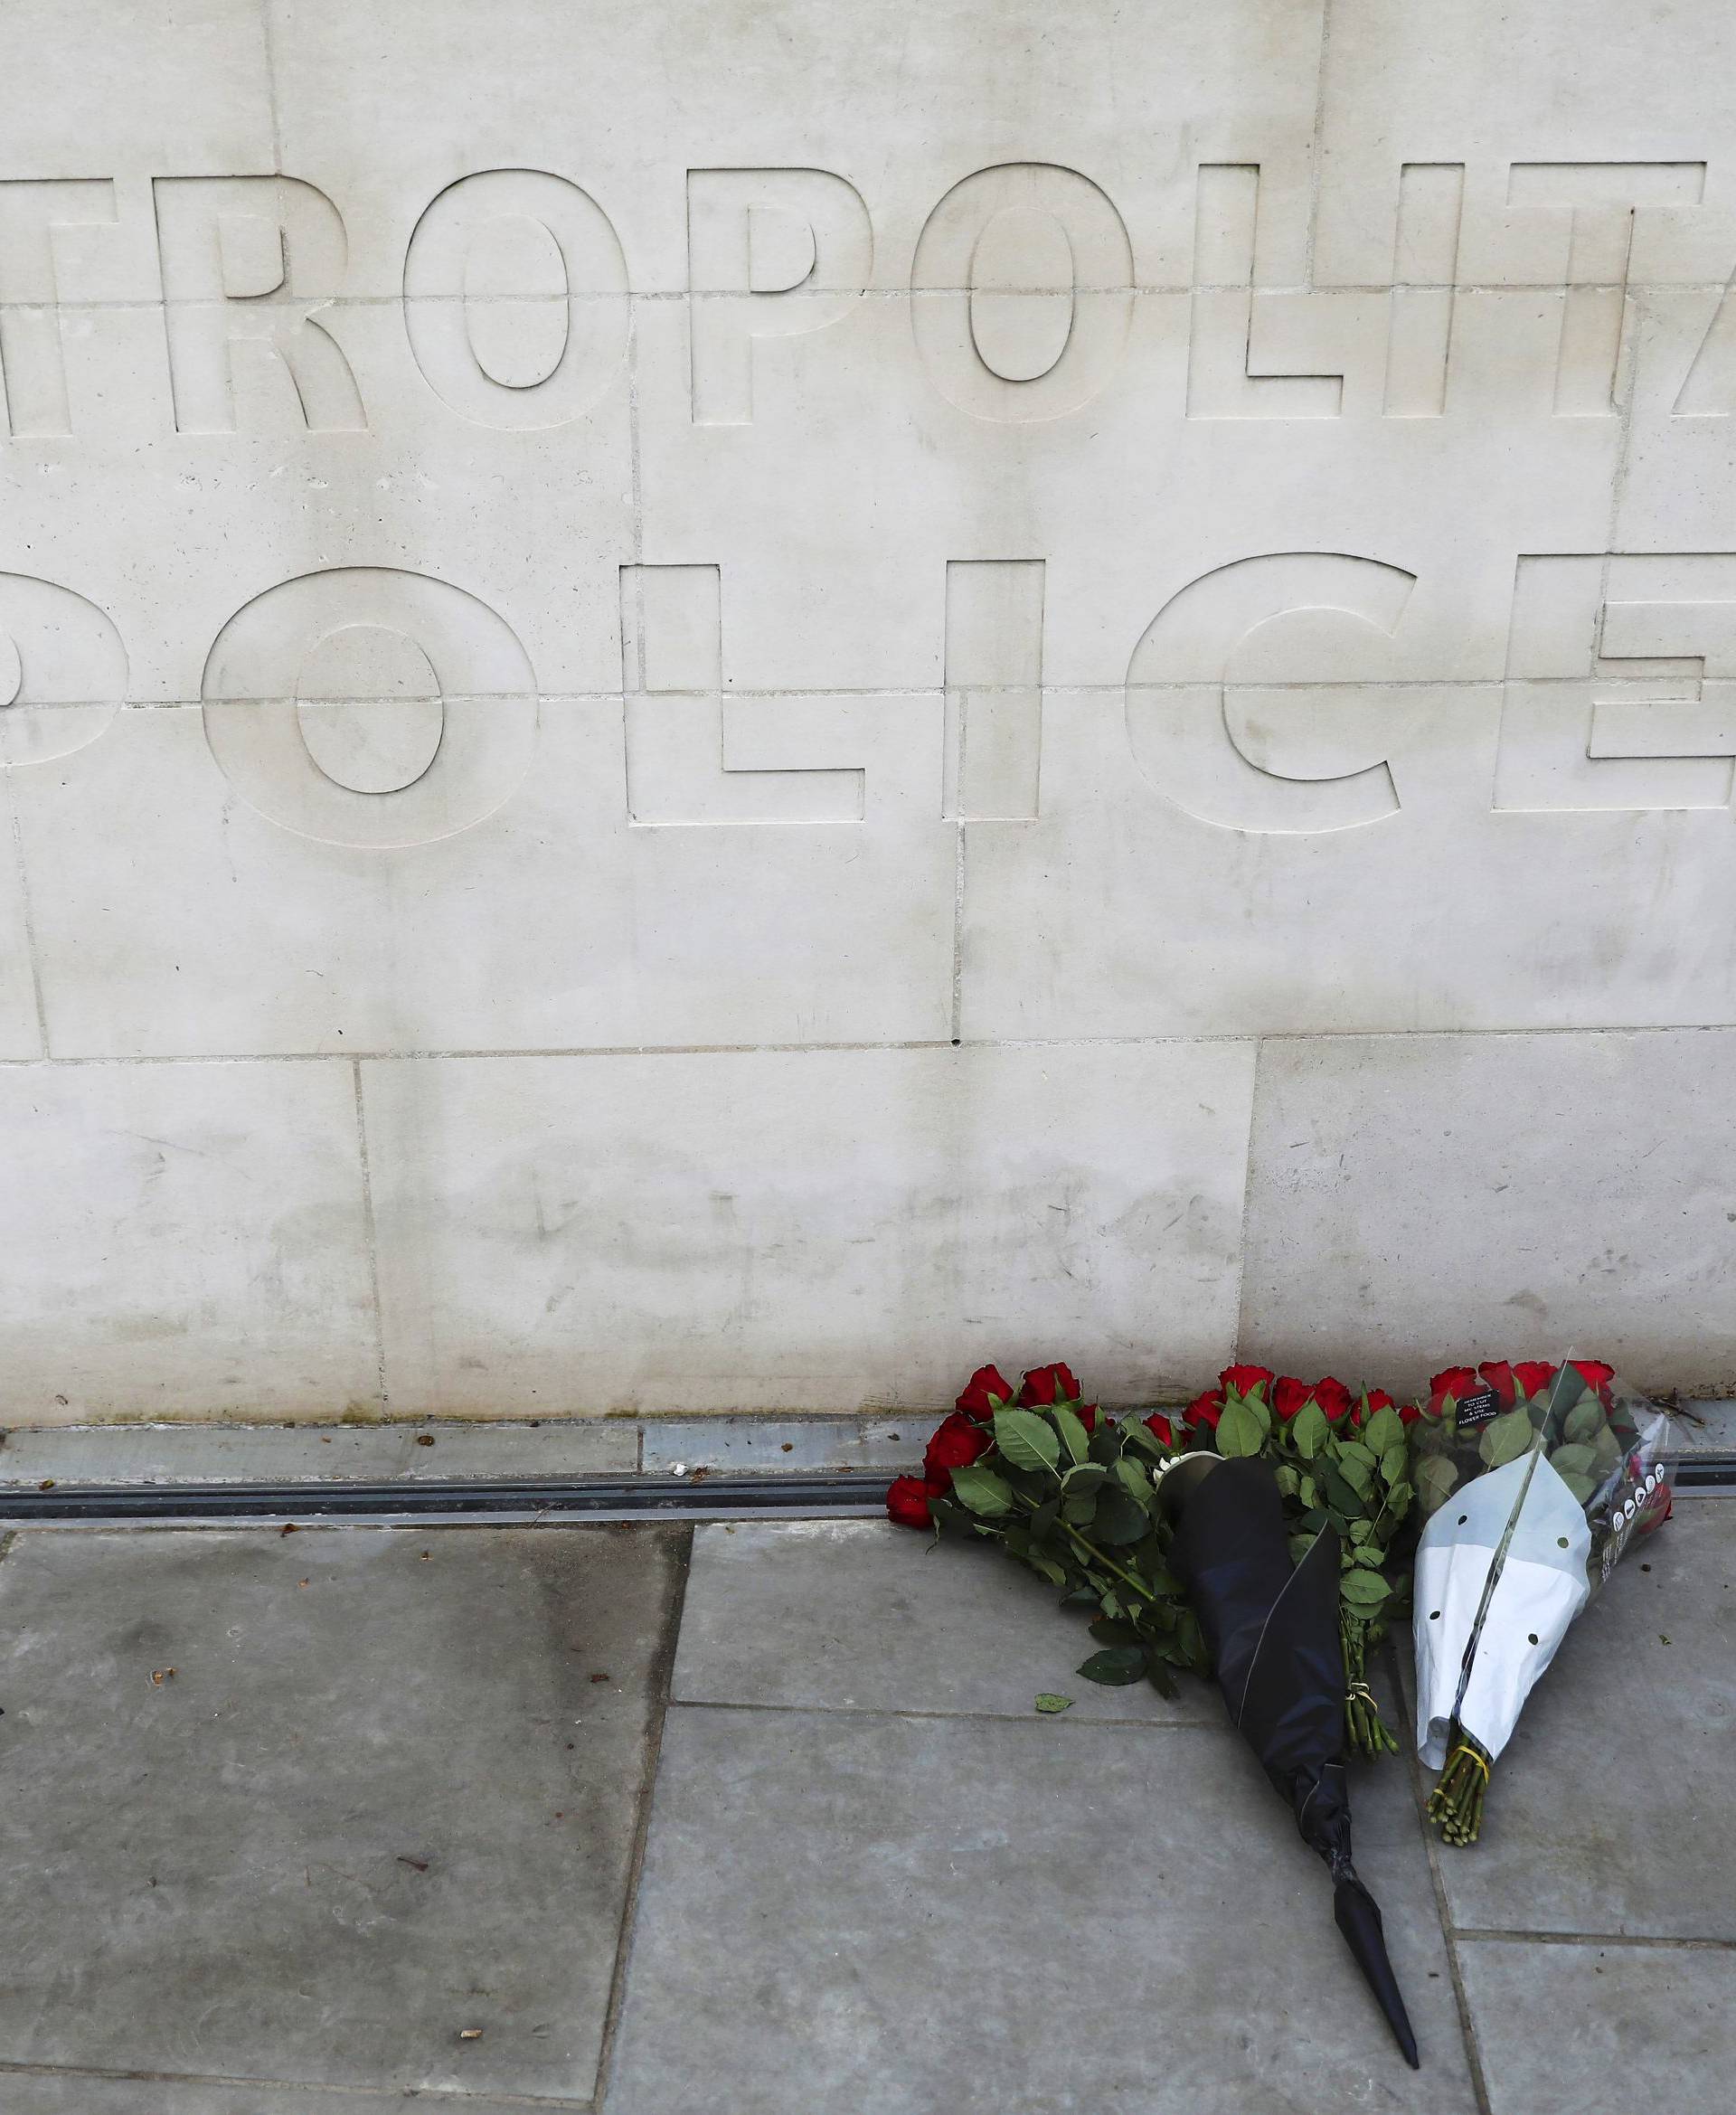 Flowers are left outside New Scotland Yard after a minute's silence the morning after an attack by a man driving a car and weilding a knife left five people dead and dozens injured, in London